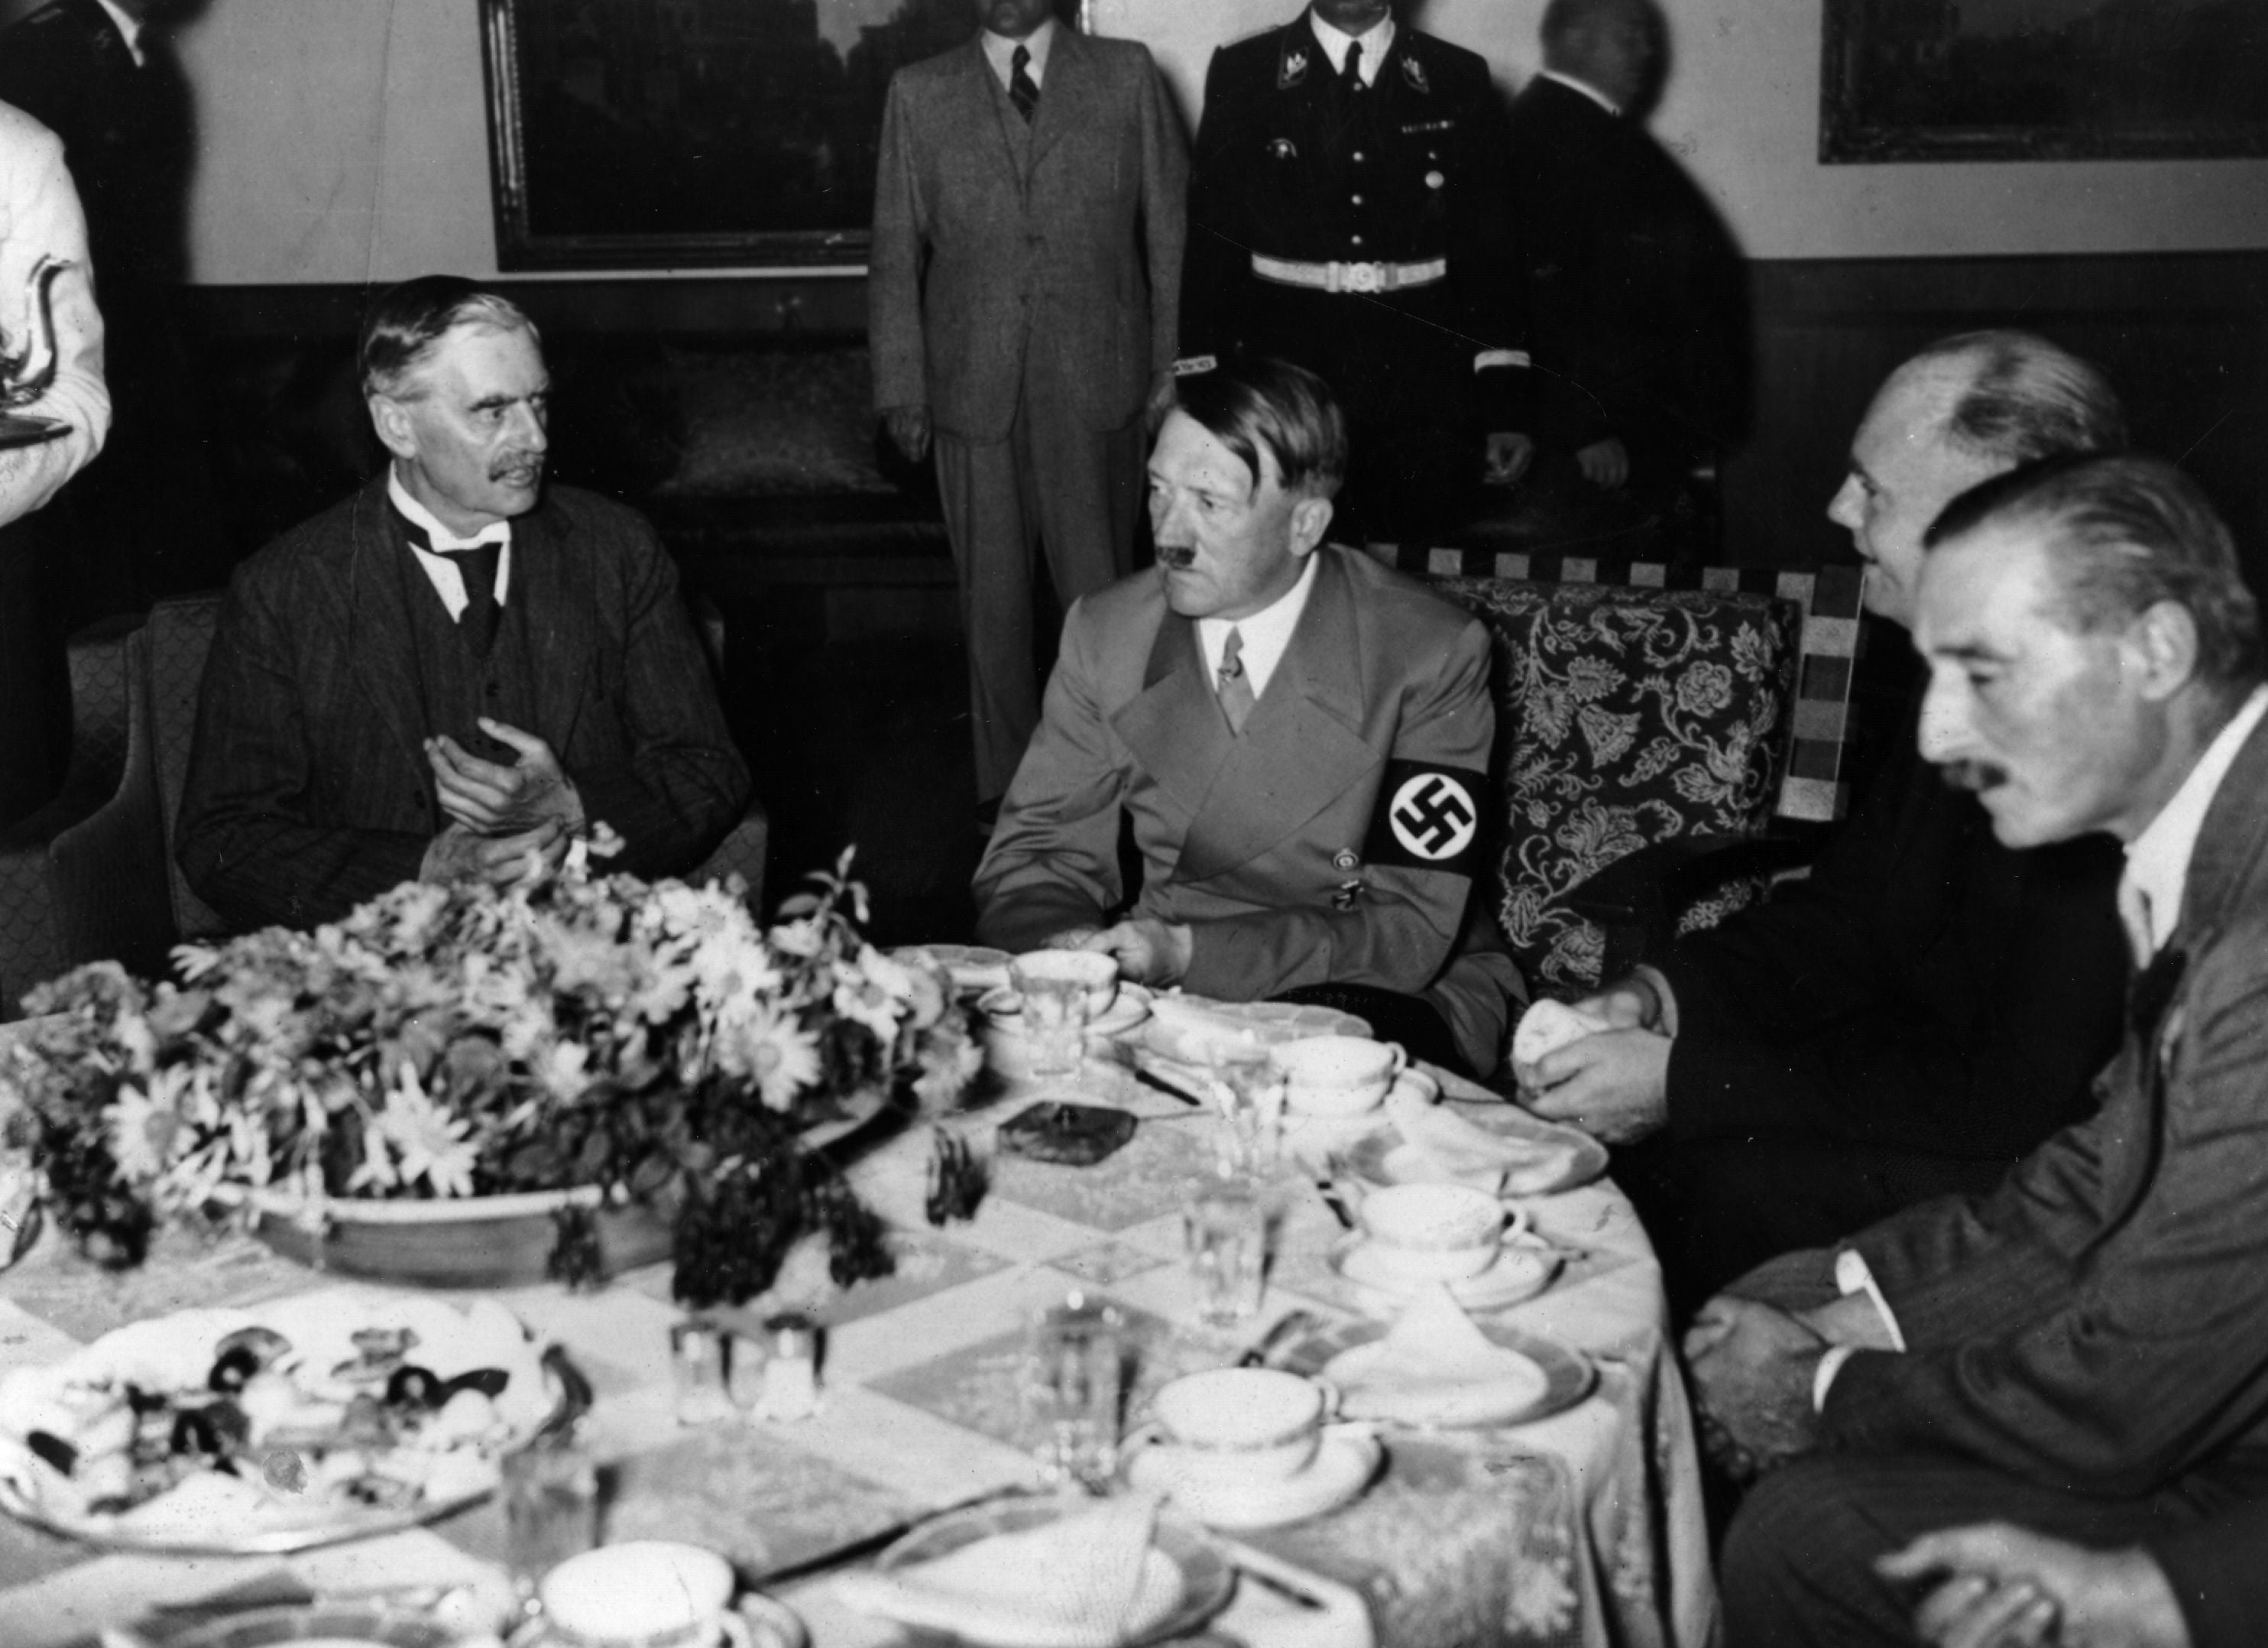 Chamberlain and Hitler at dinner during the former’s visit to Munich